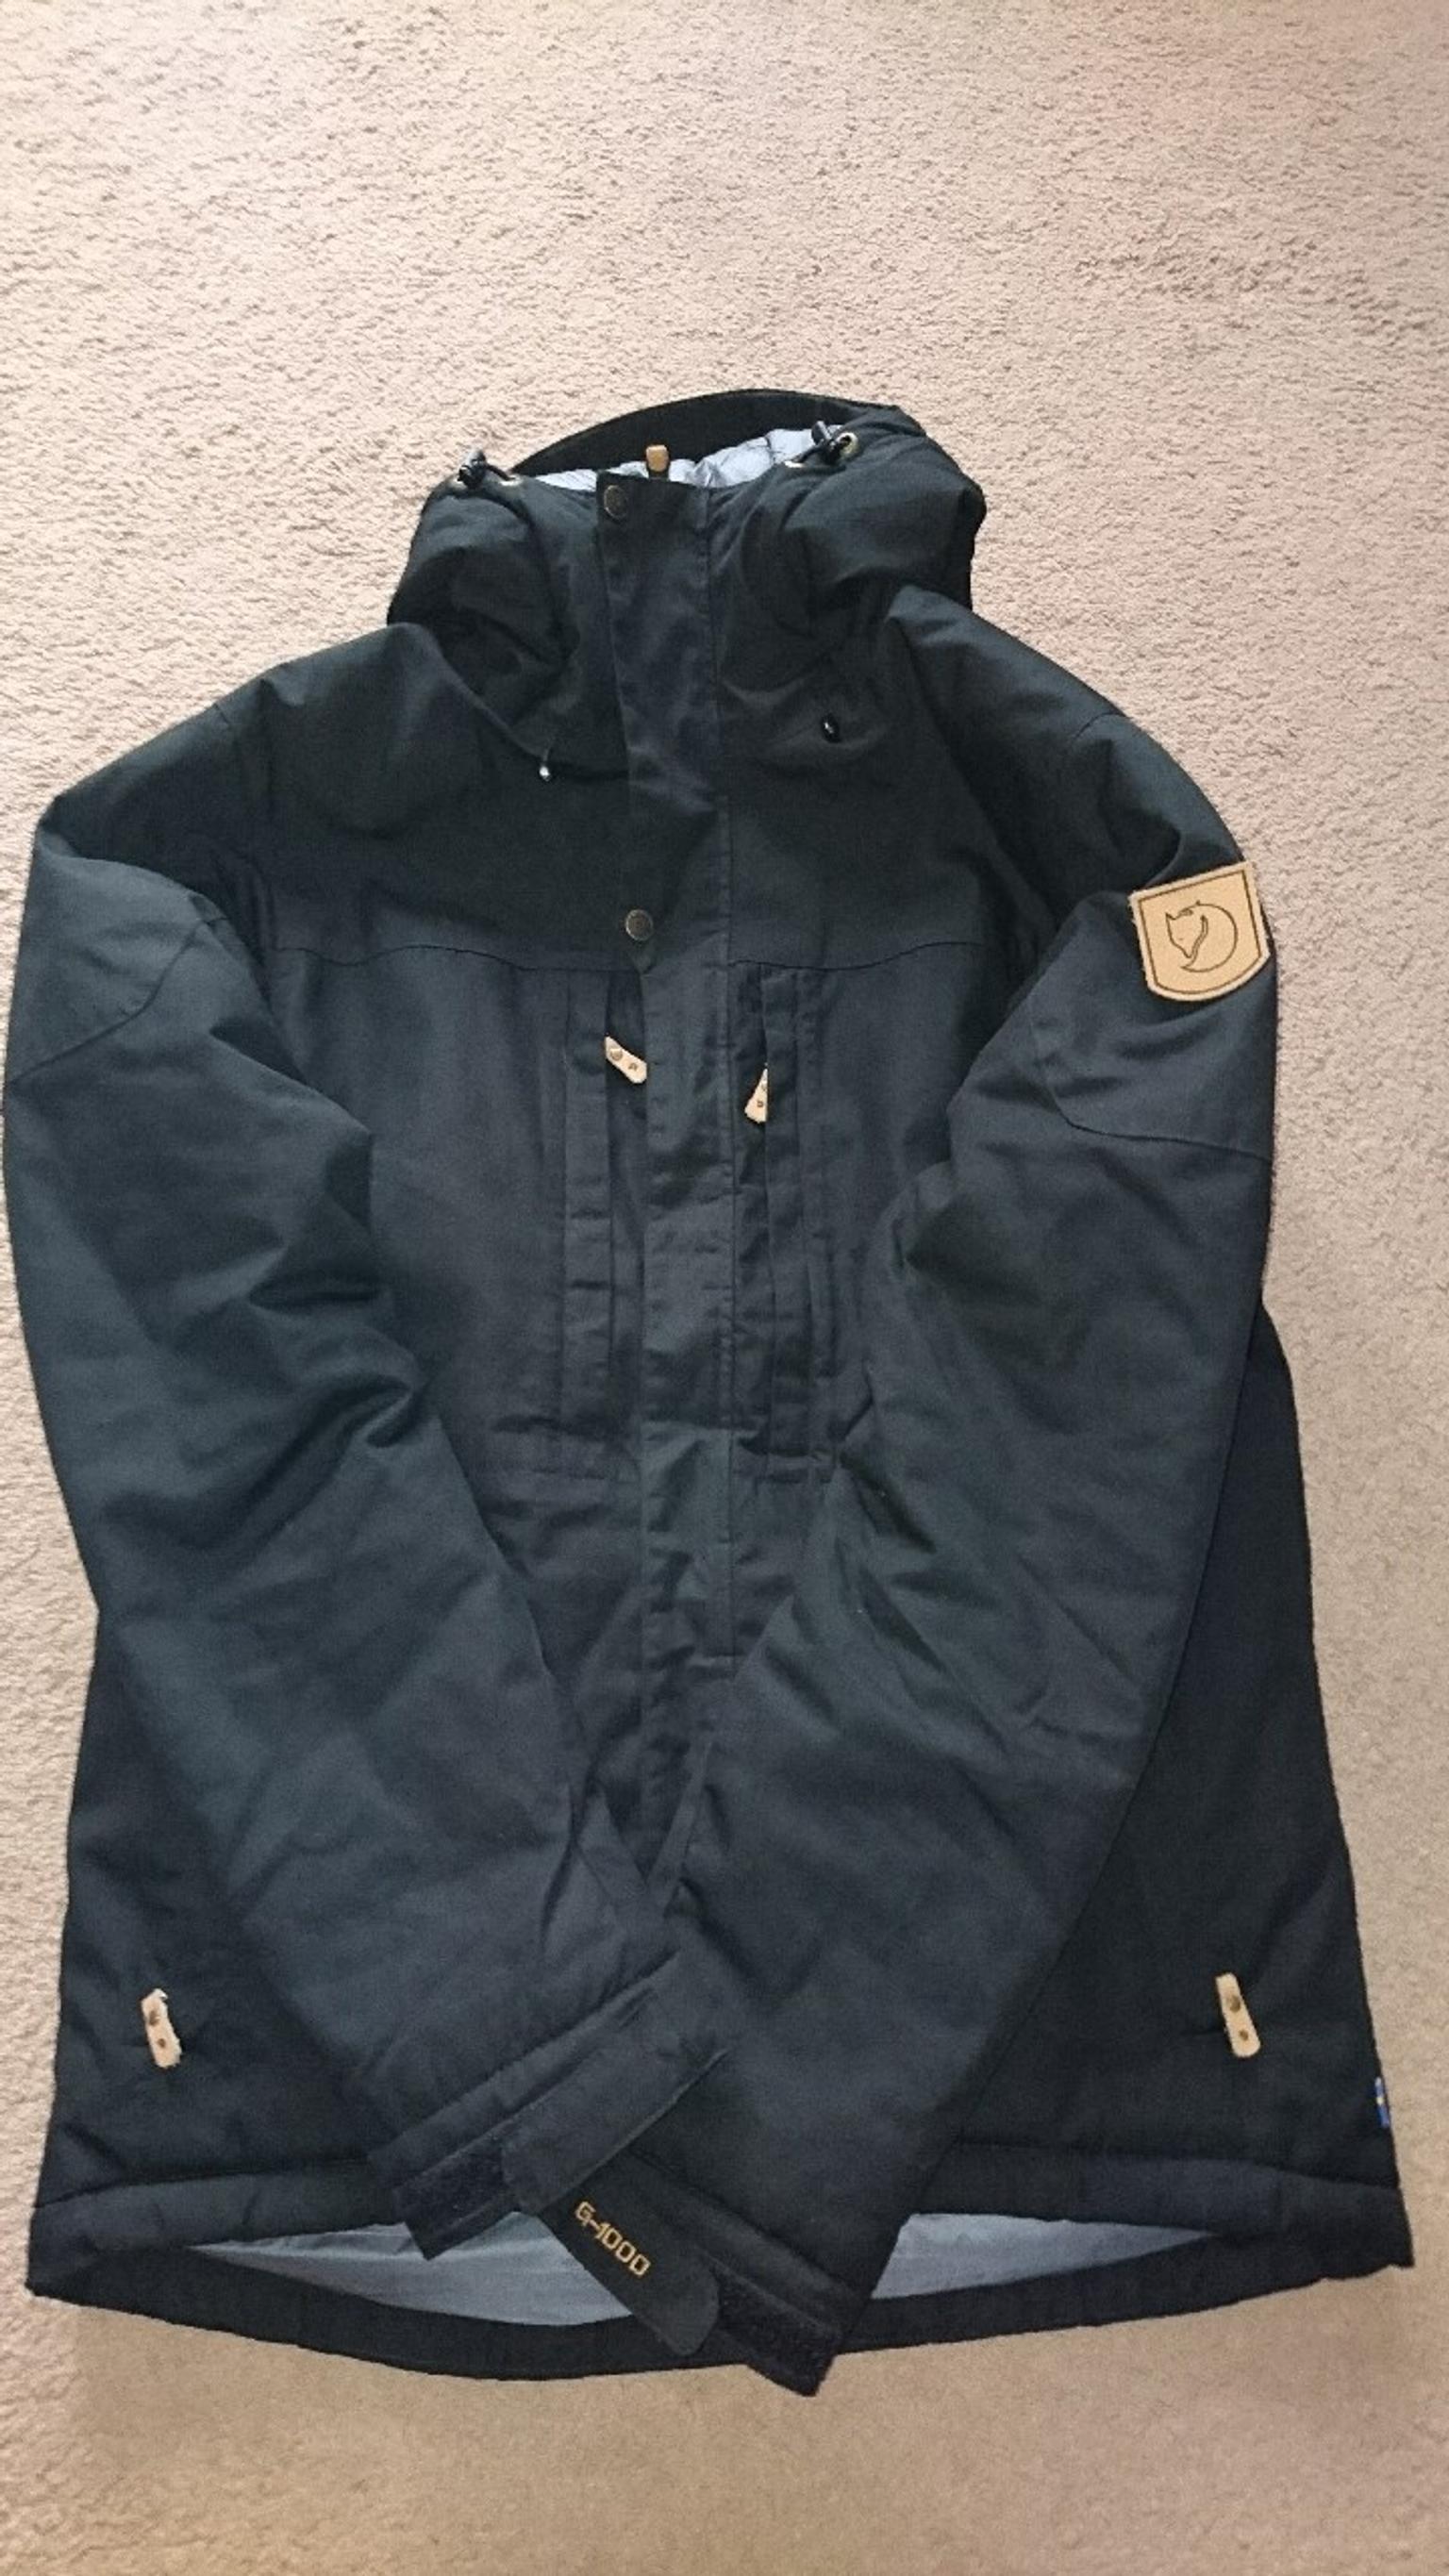 Fjallraven Skogso Padded Jacket In Dh6 Colliery For 200 00 For Sale Shpock